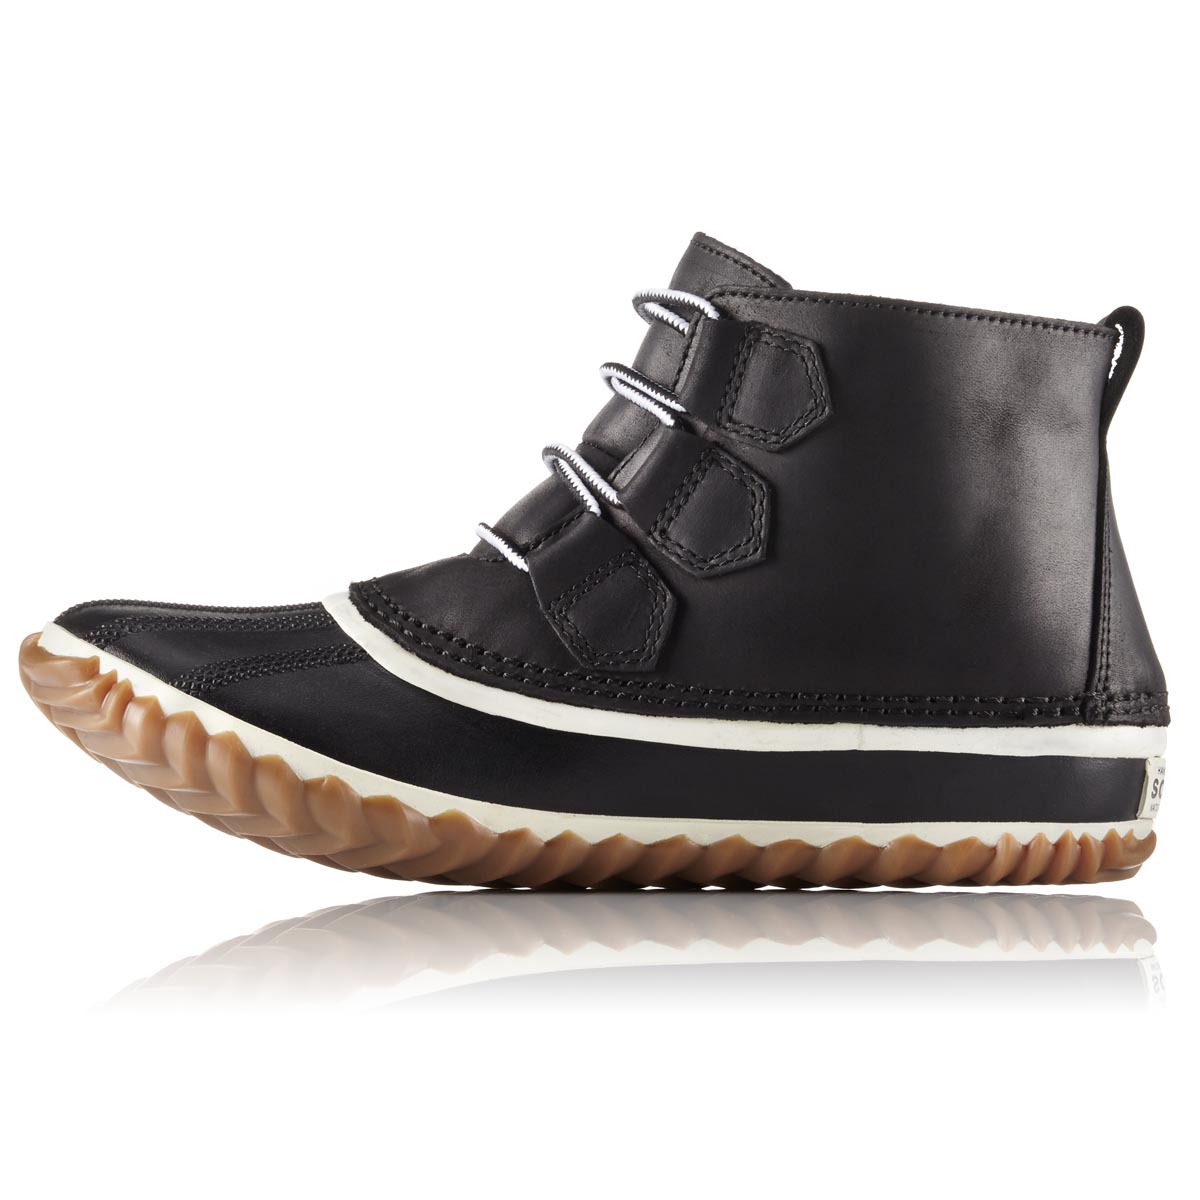 Sorel Women's Out 'N About Leather